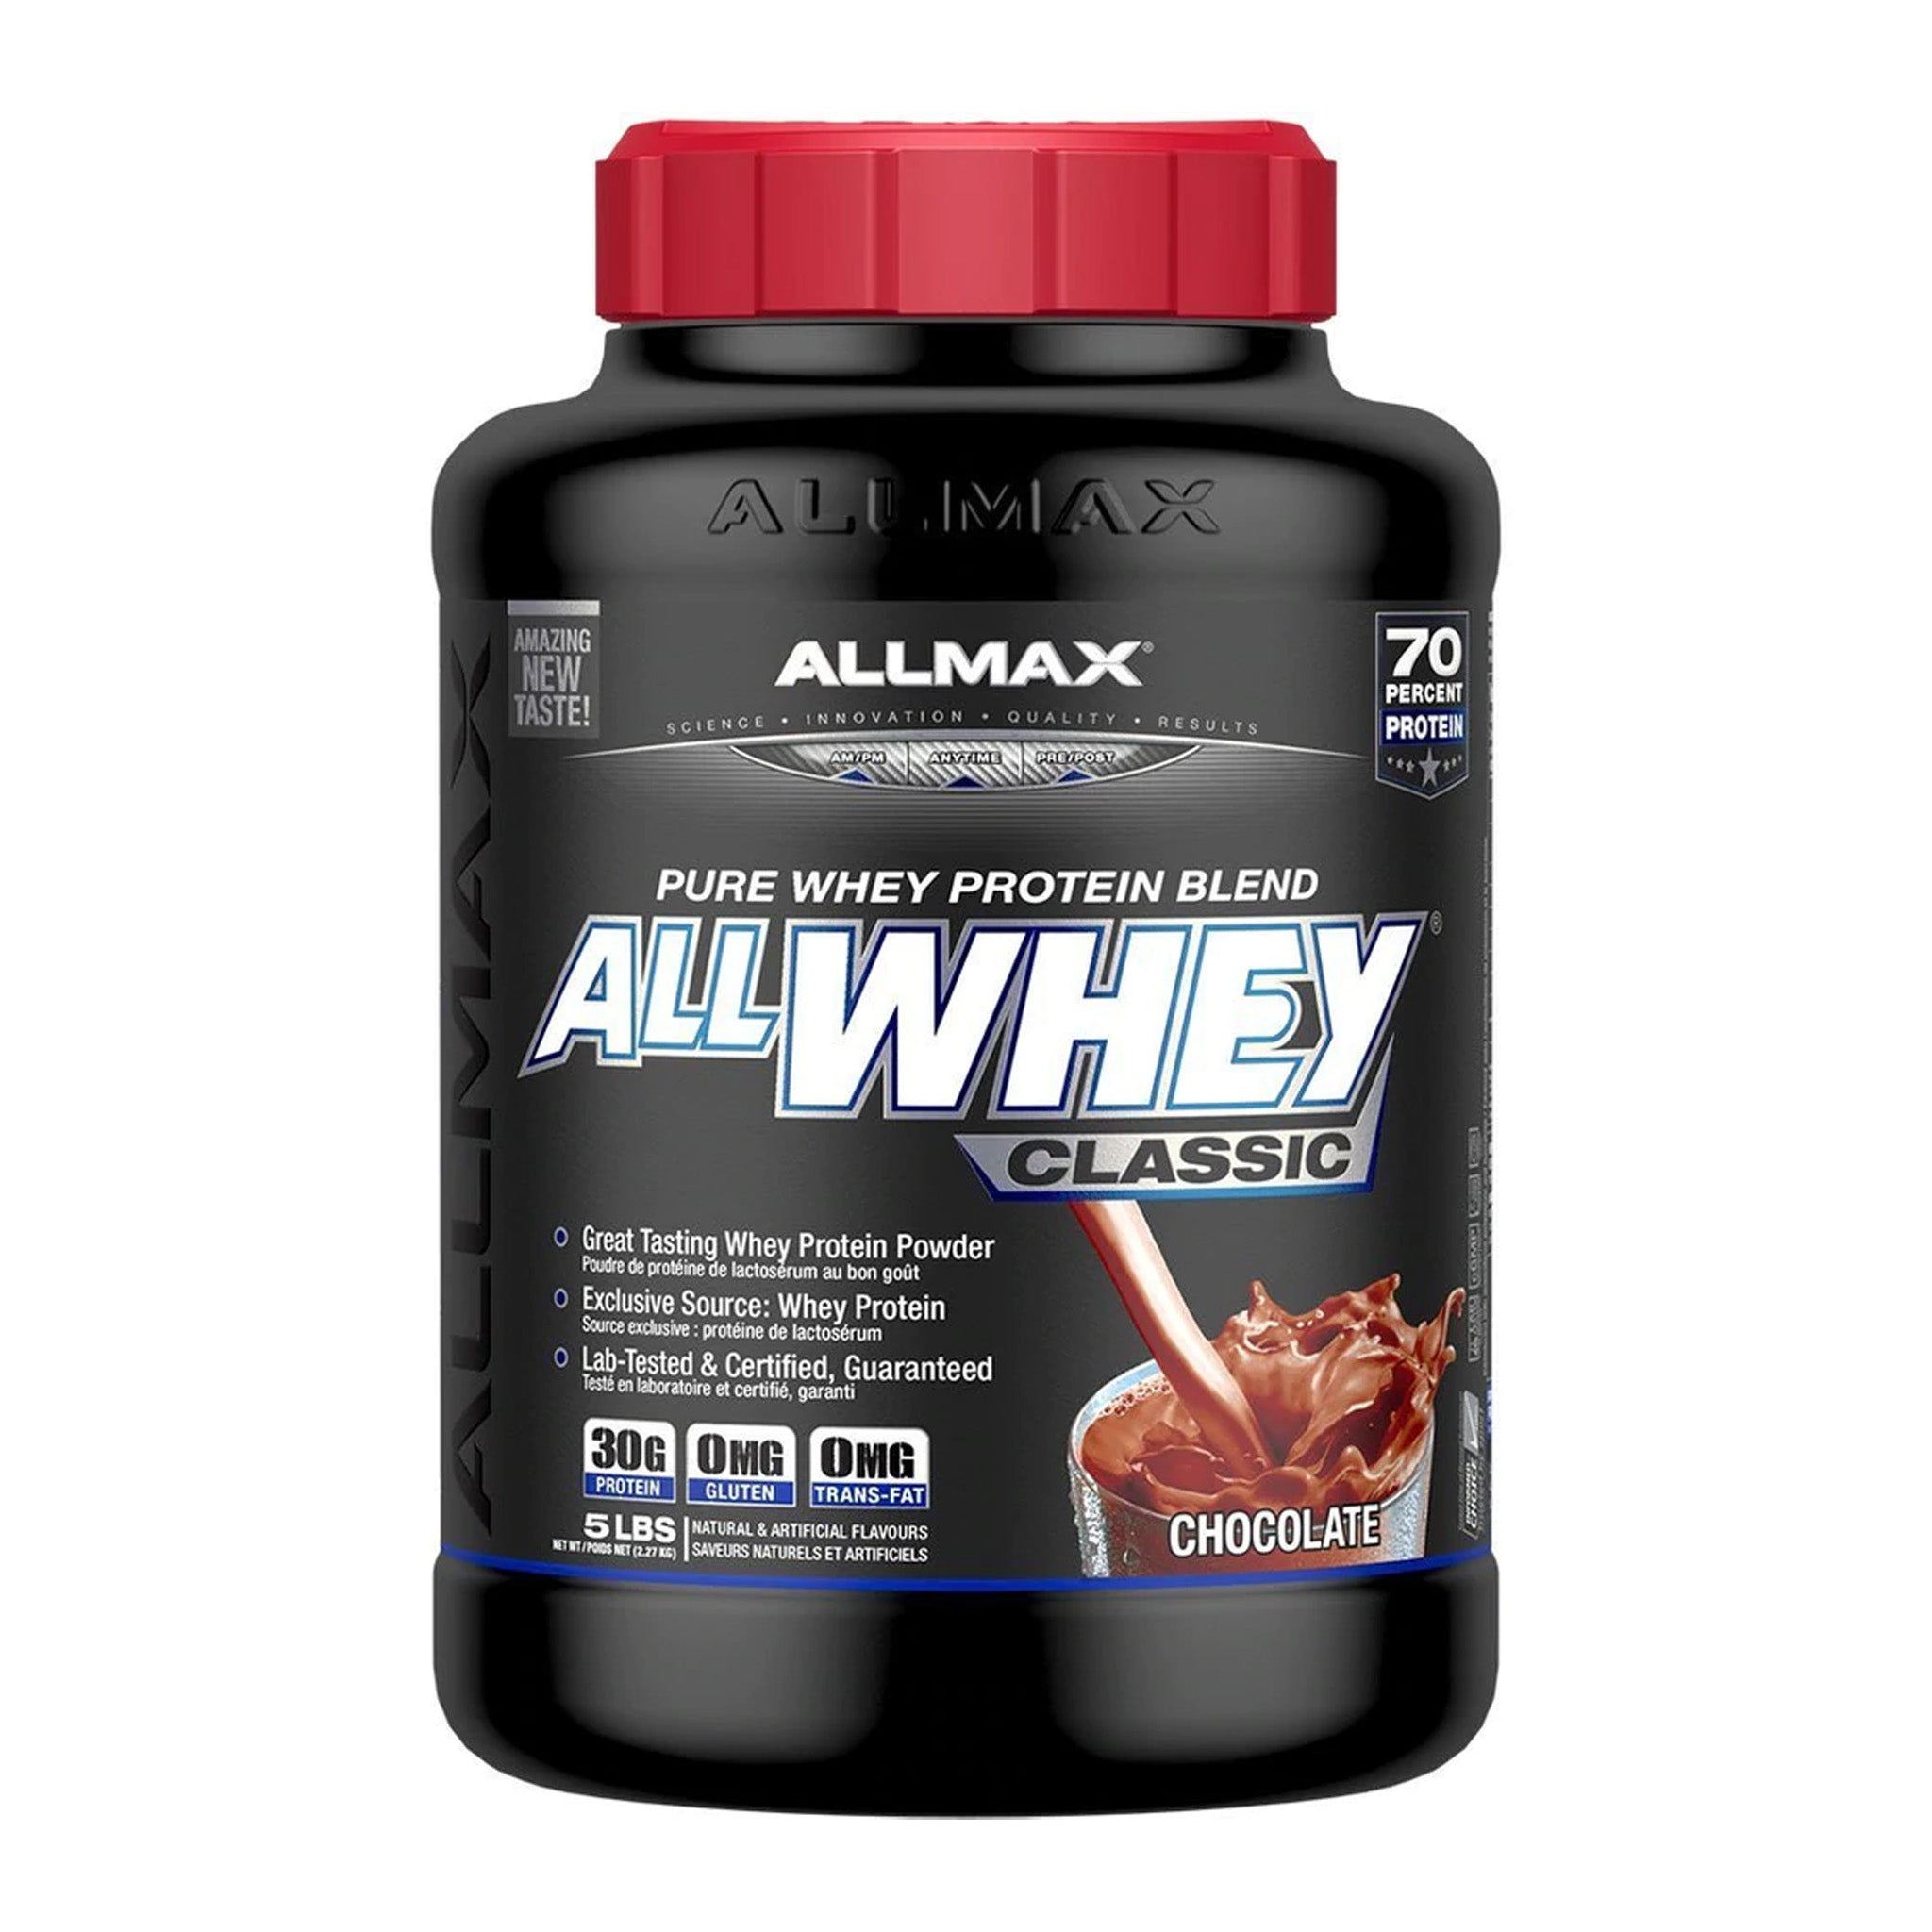 Allwhey Classic (5lbs) - BLOWOUT